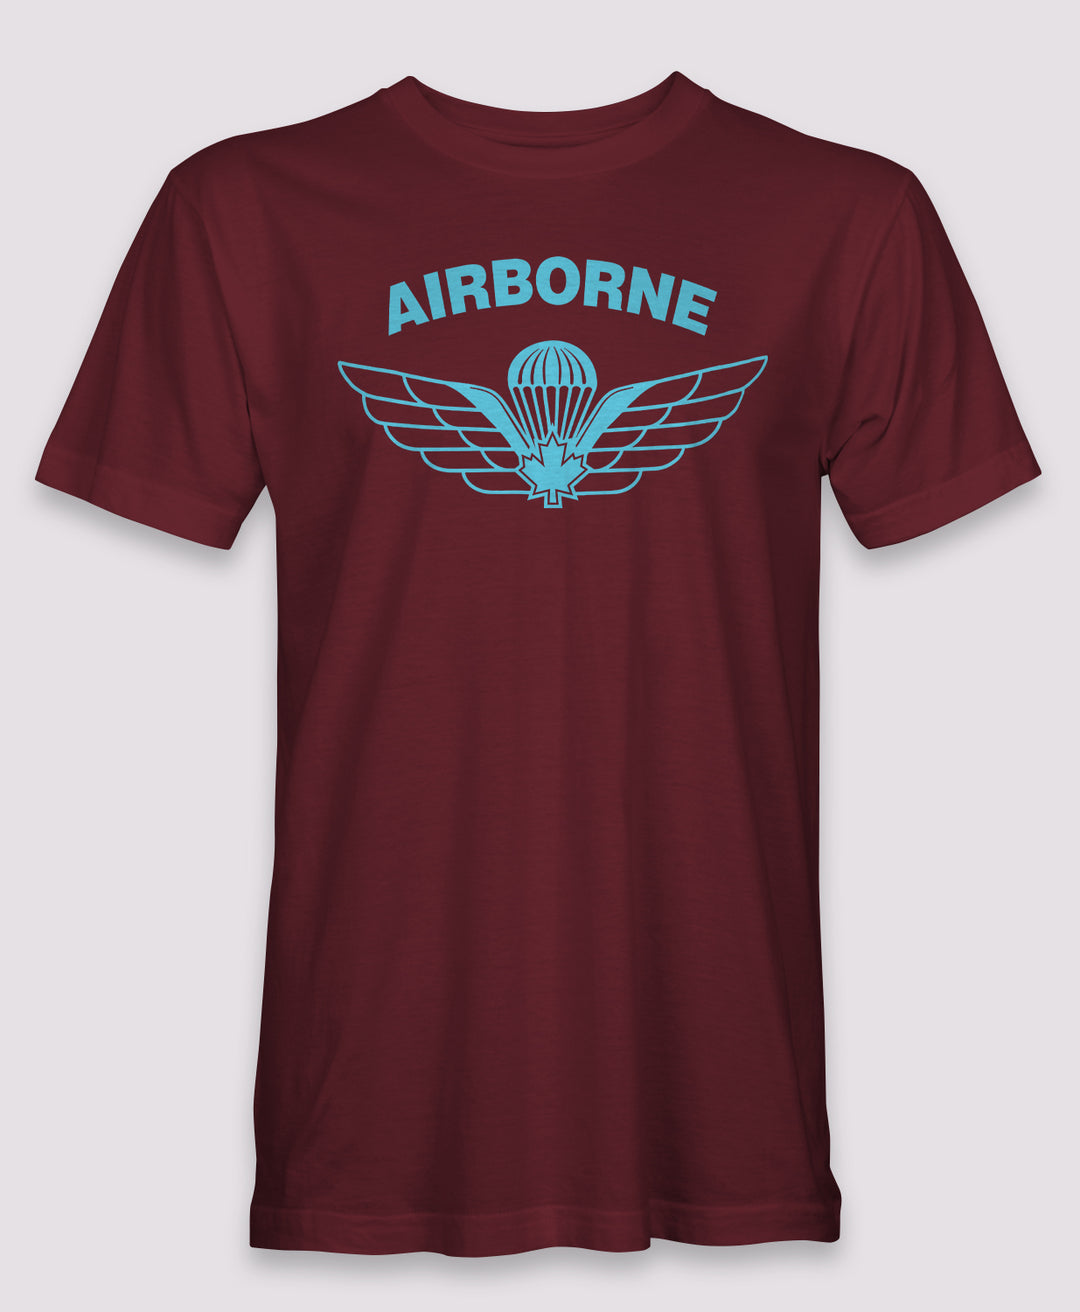 Canadian Airborne T-Shirt